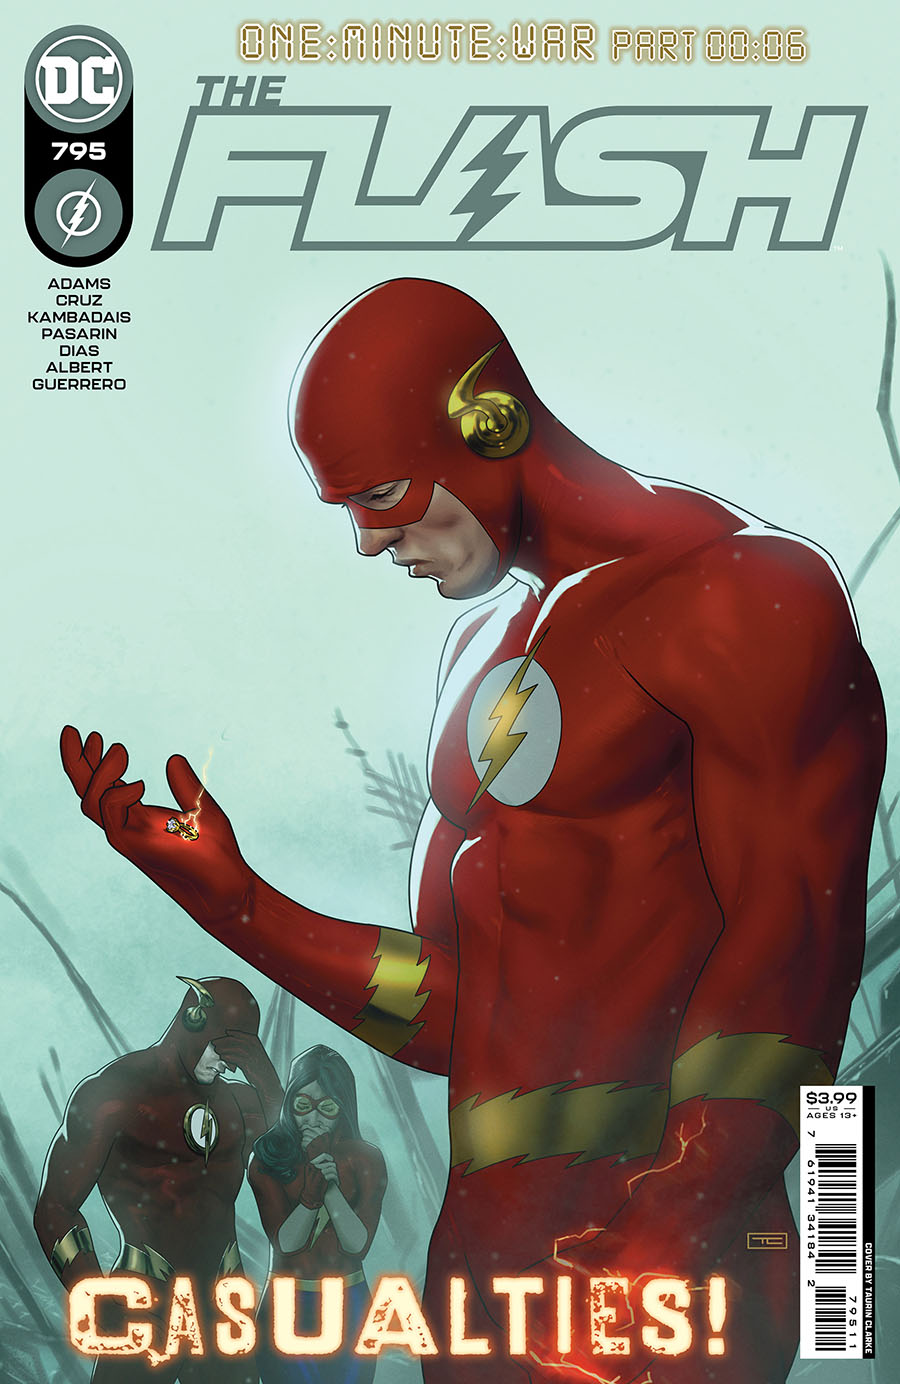 Flash Vol 5 #795 Cover A Regular Taurin Clarke Cover (One-Minute War Part 6)